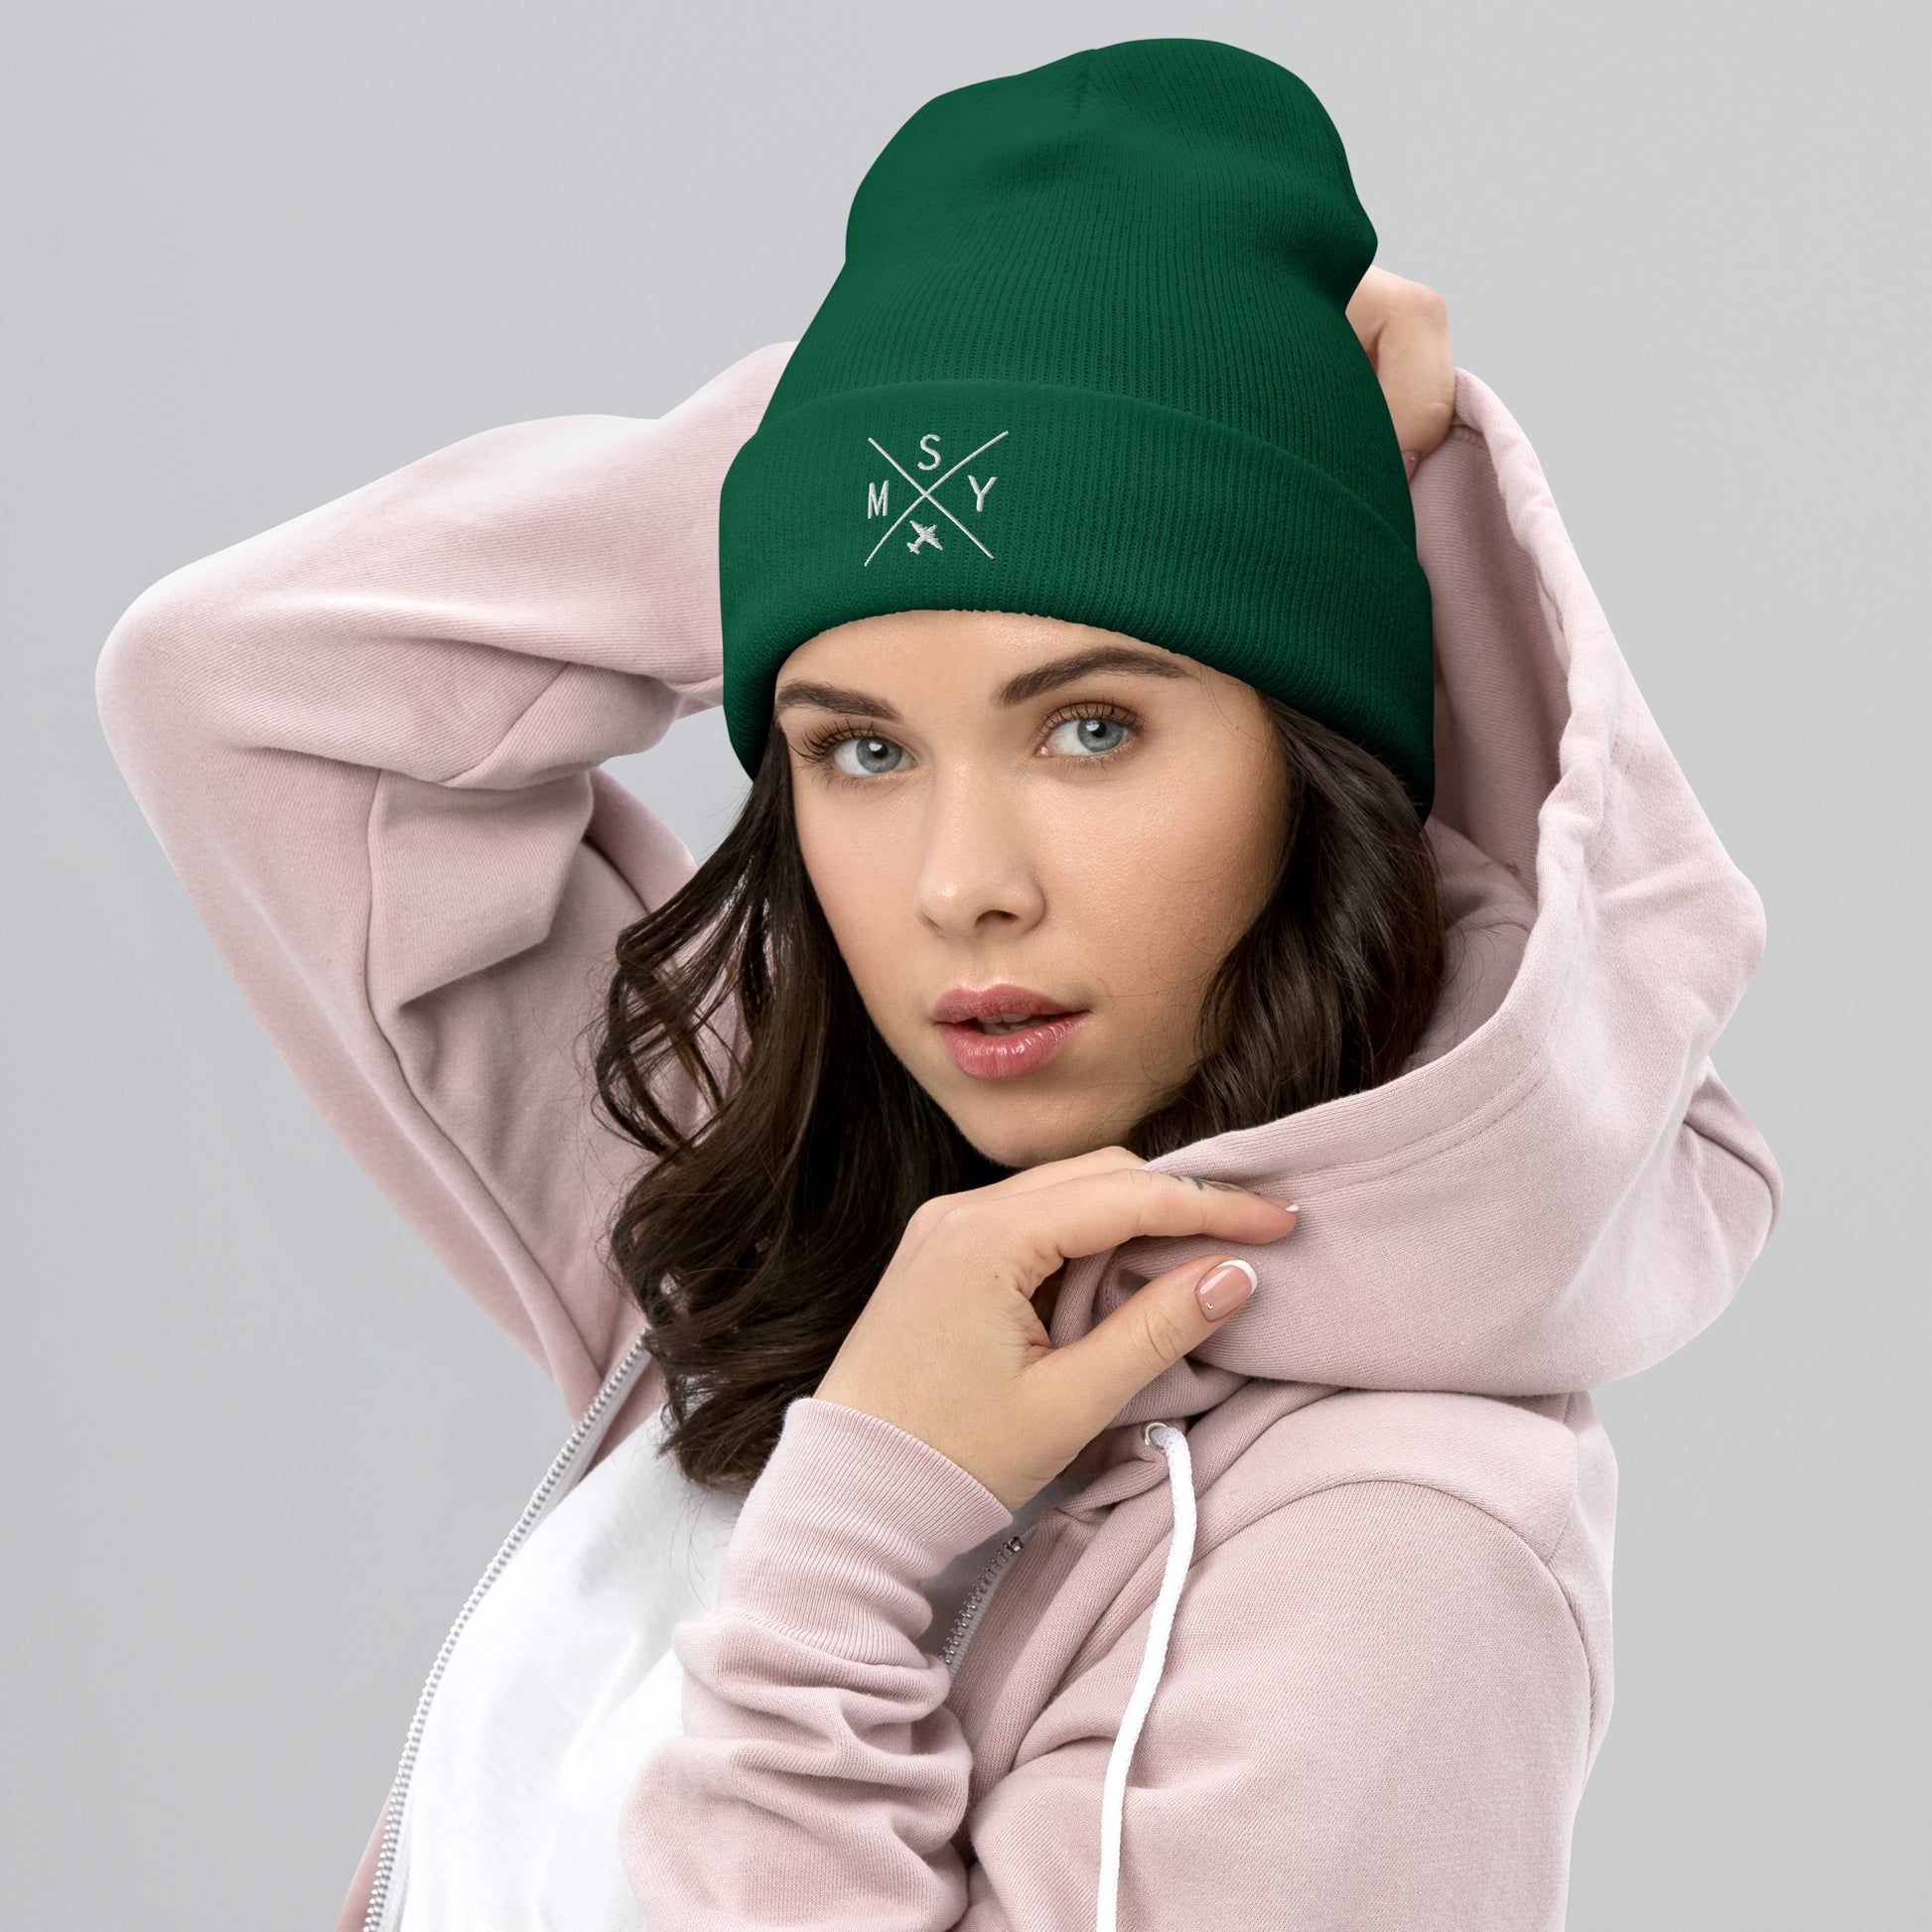 Crossed-X Cuffed Beanie - White • MSY New Orleans • YHM Designs - Image 05